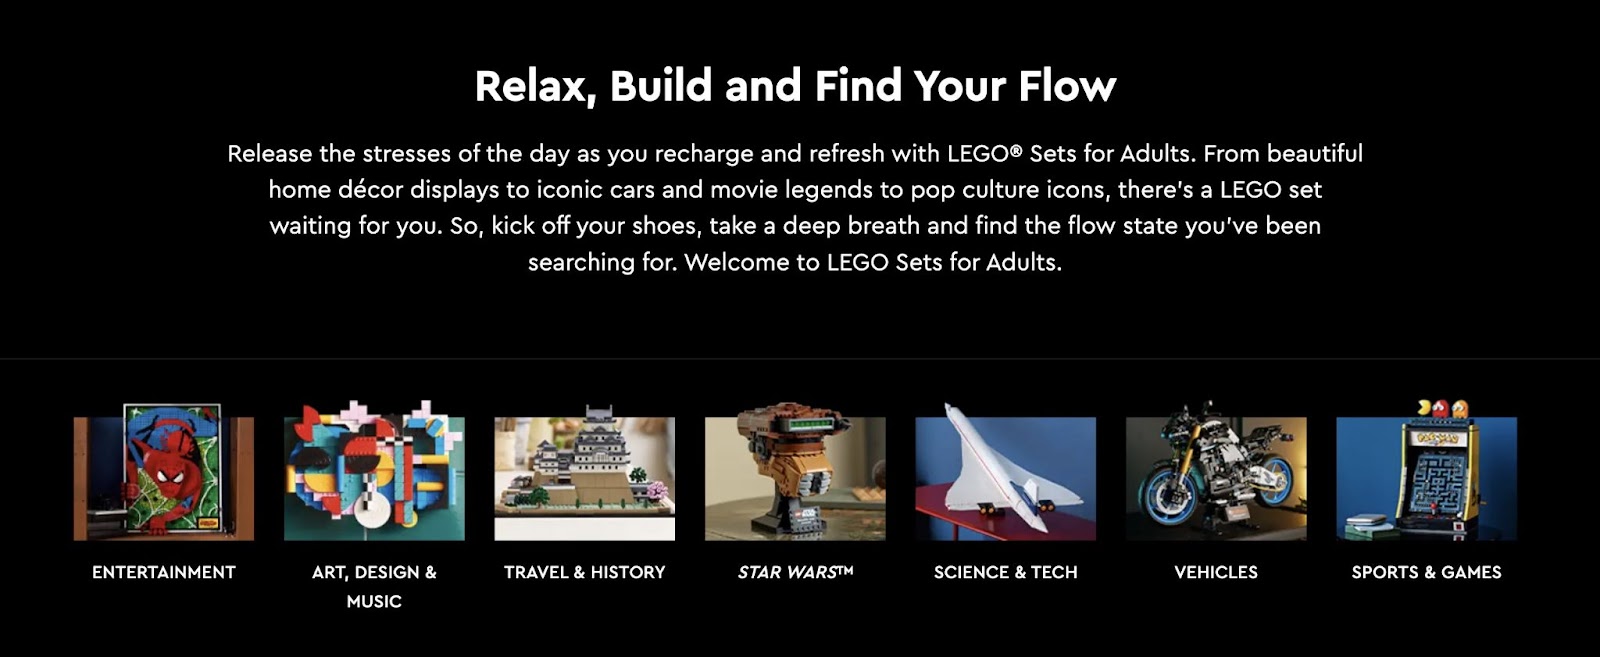 "Relax, Build and Find Your Flow" section of Lego's website